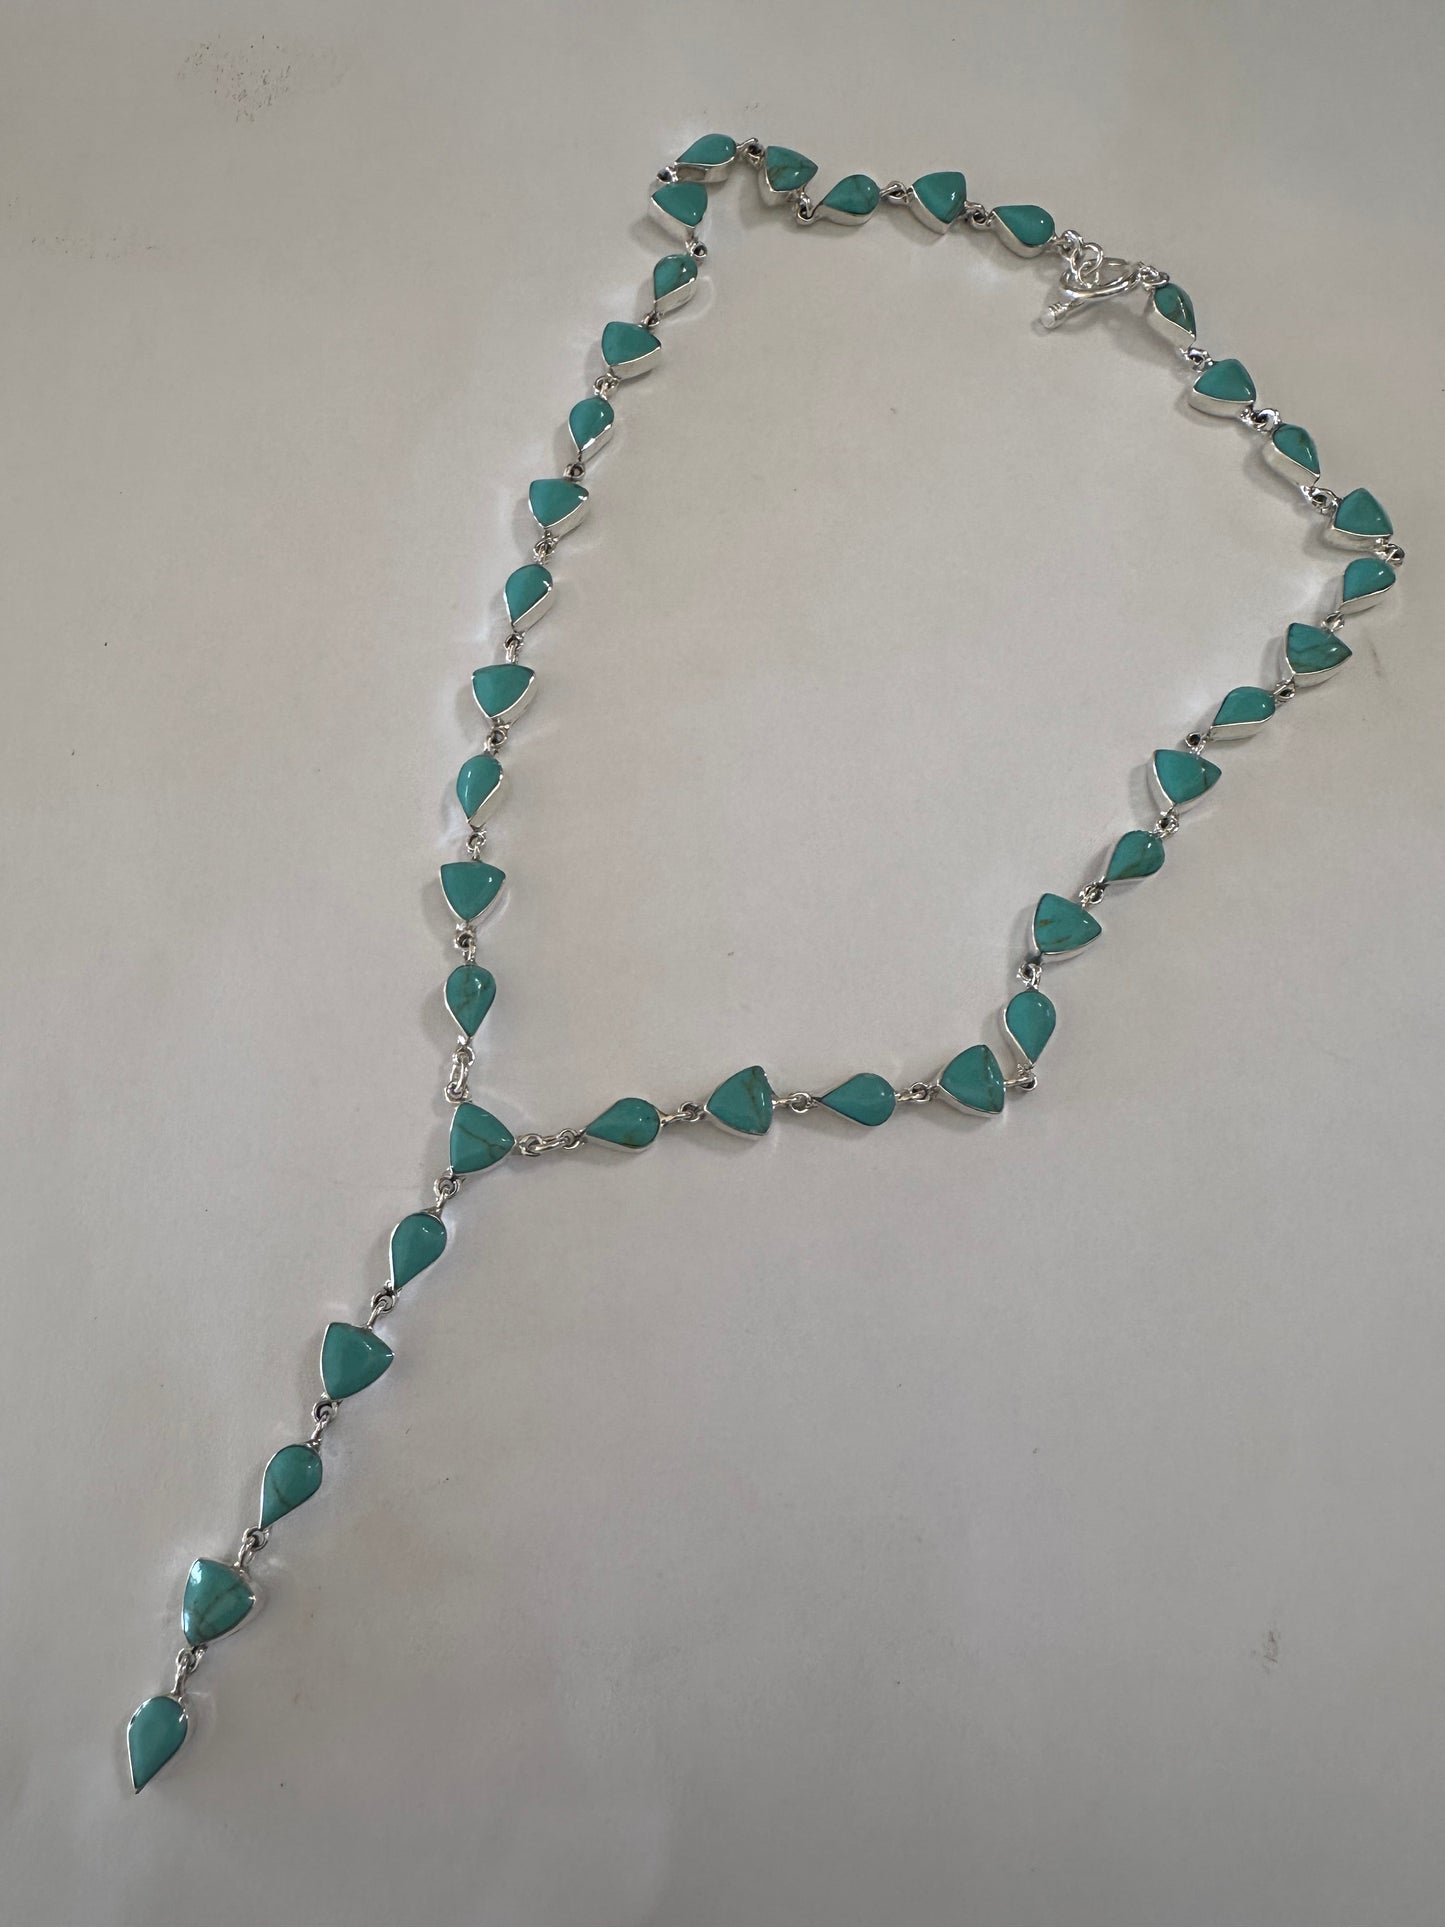 Stunning Turquoise and Sterling Silver Lariat Necklace Hand Made In Mexico